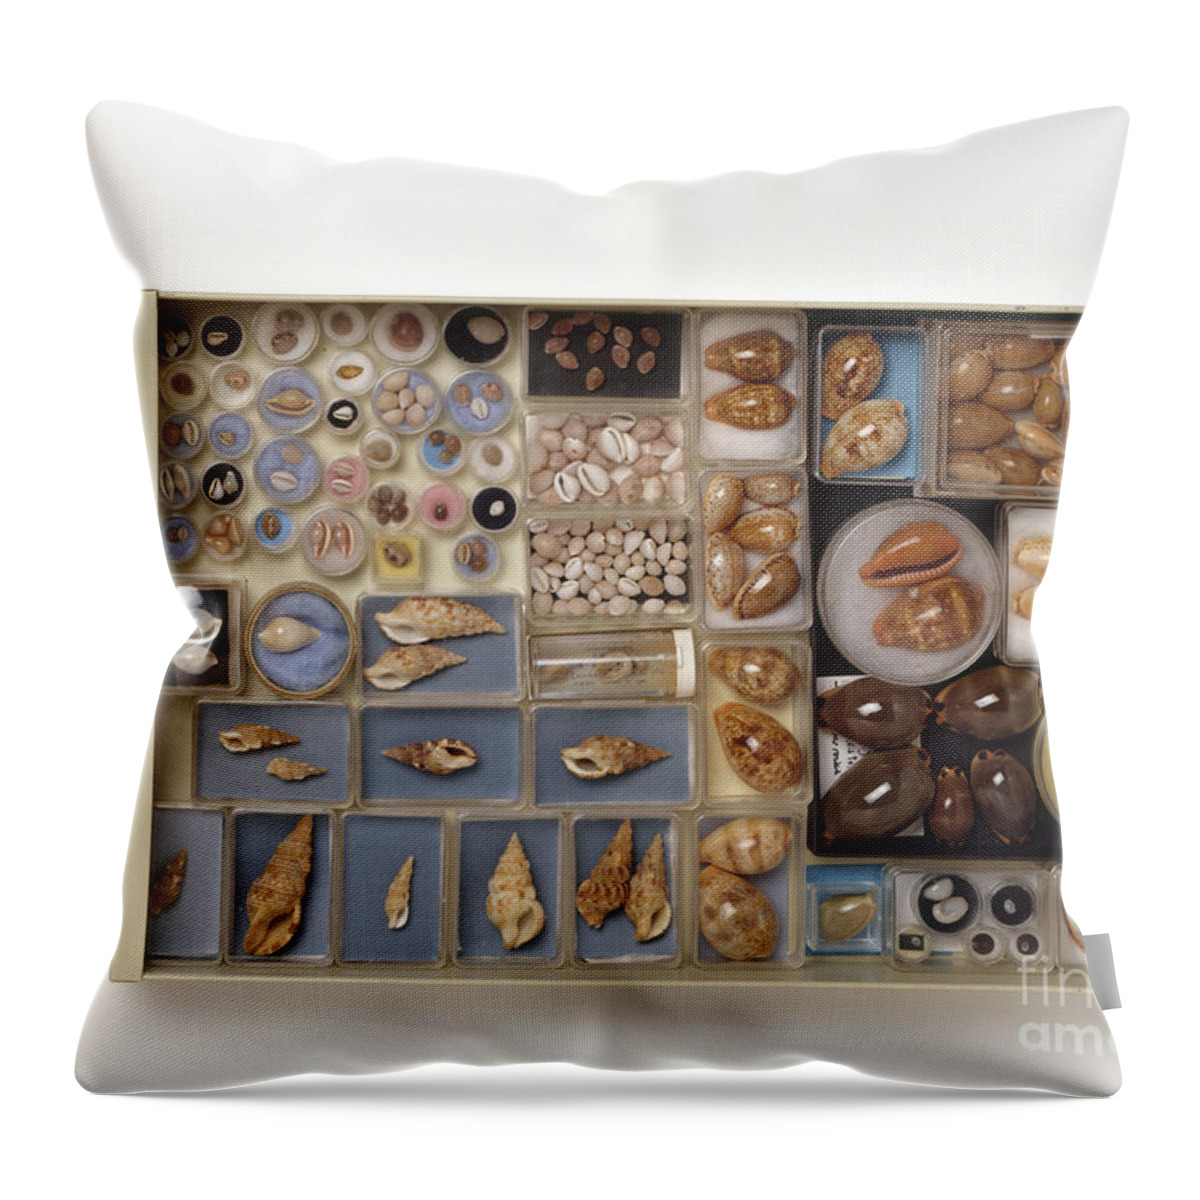 Abundance Throw Pillow featuring the photograph Large Collection Of Shells In Drawer by Matthew Ward / Dorling Kindersley